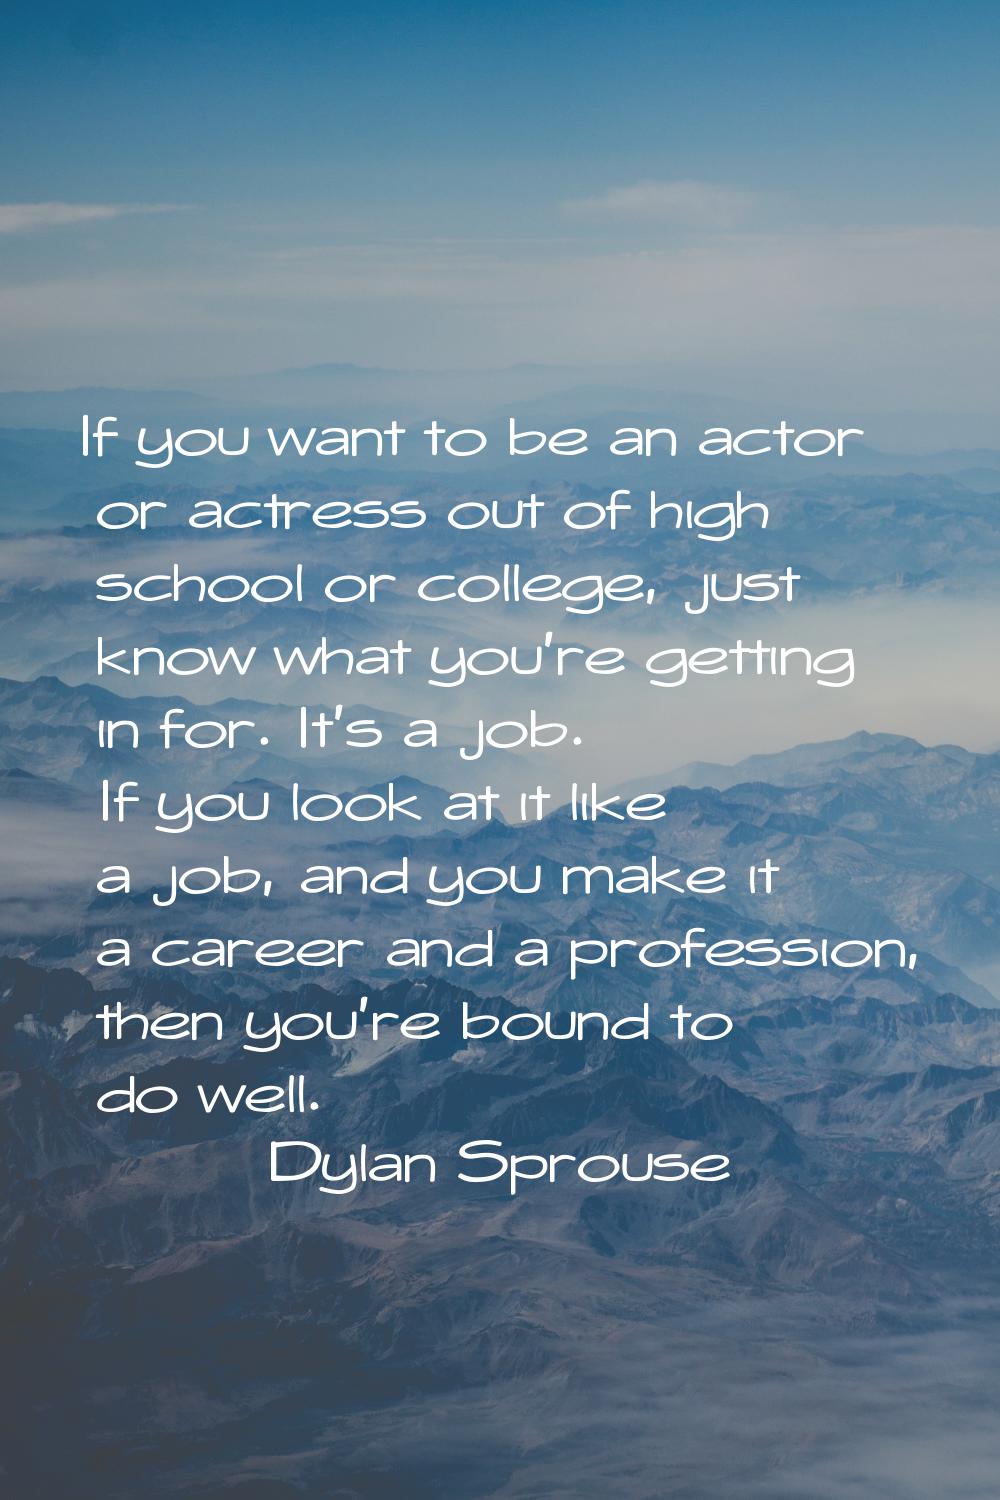 If you want to be an actor or actress out of high school or college, just know what you're getting 